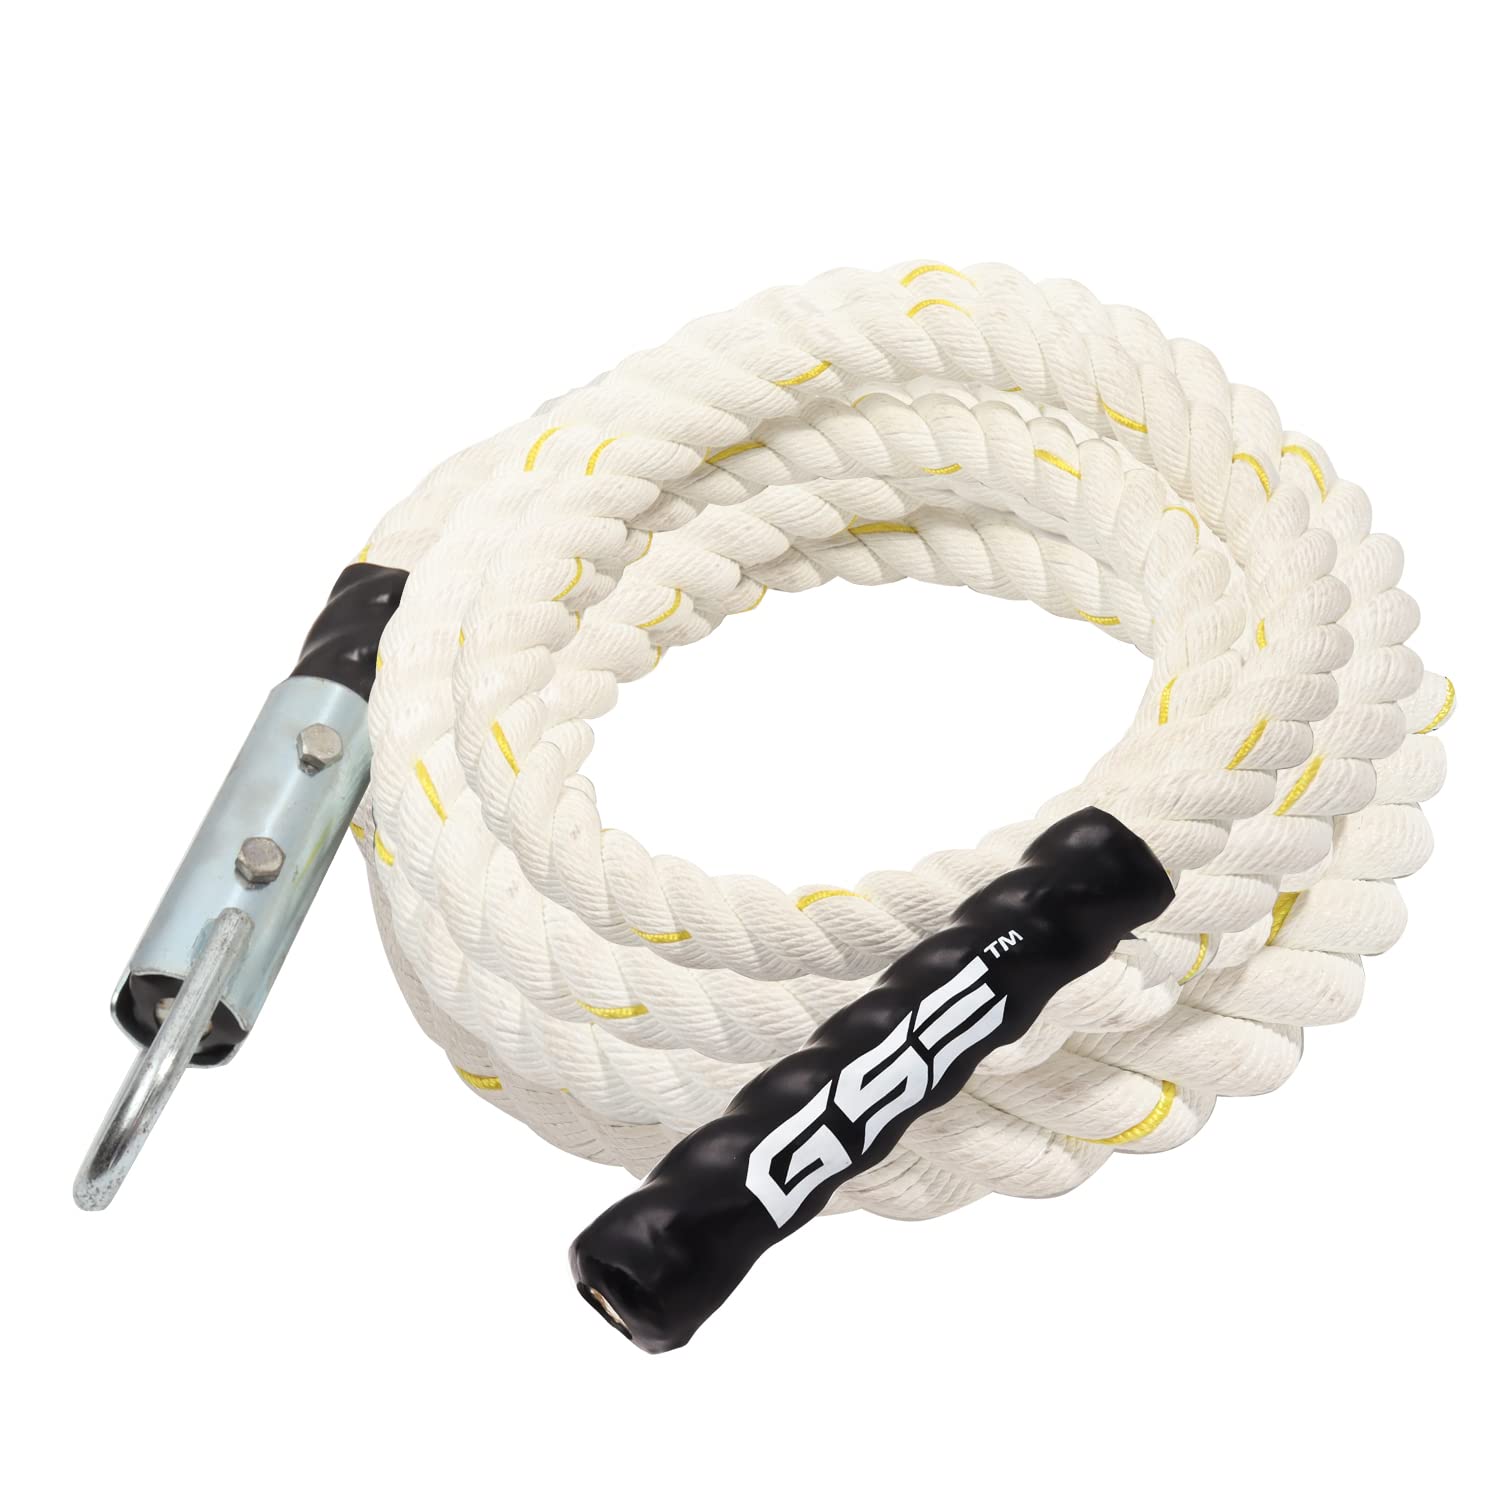 GSE Games & Sports Expert Polyester Gym Fitness Training Climbing Ropes (6ft to 30ft Available)